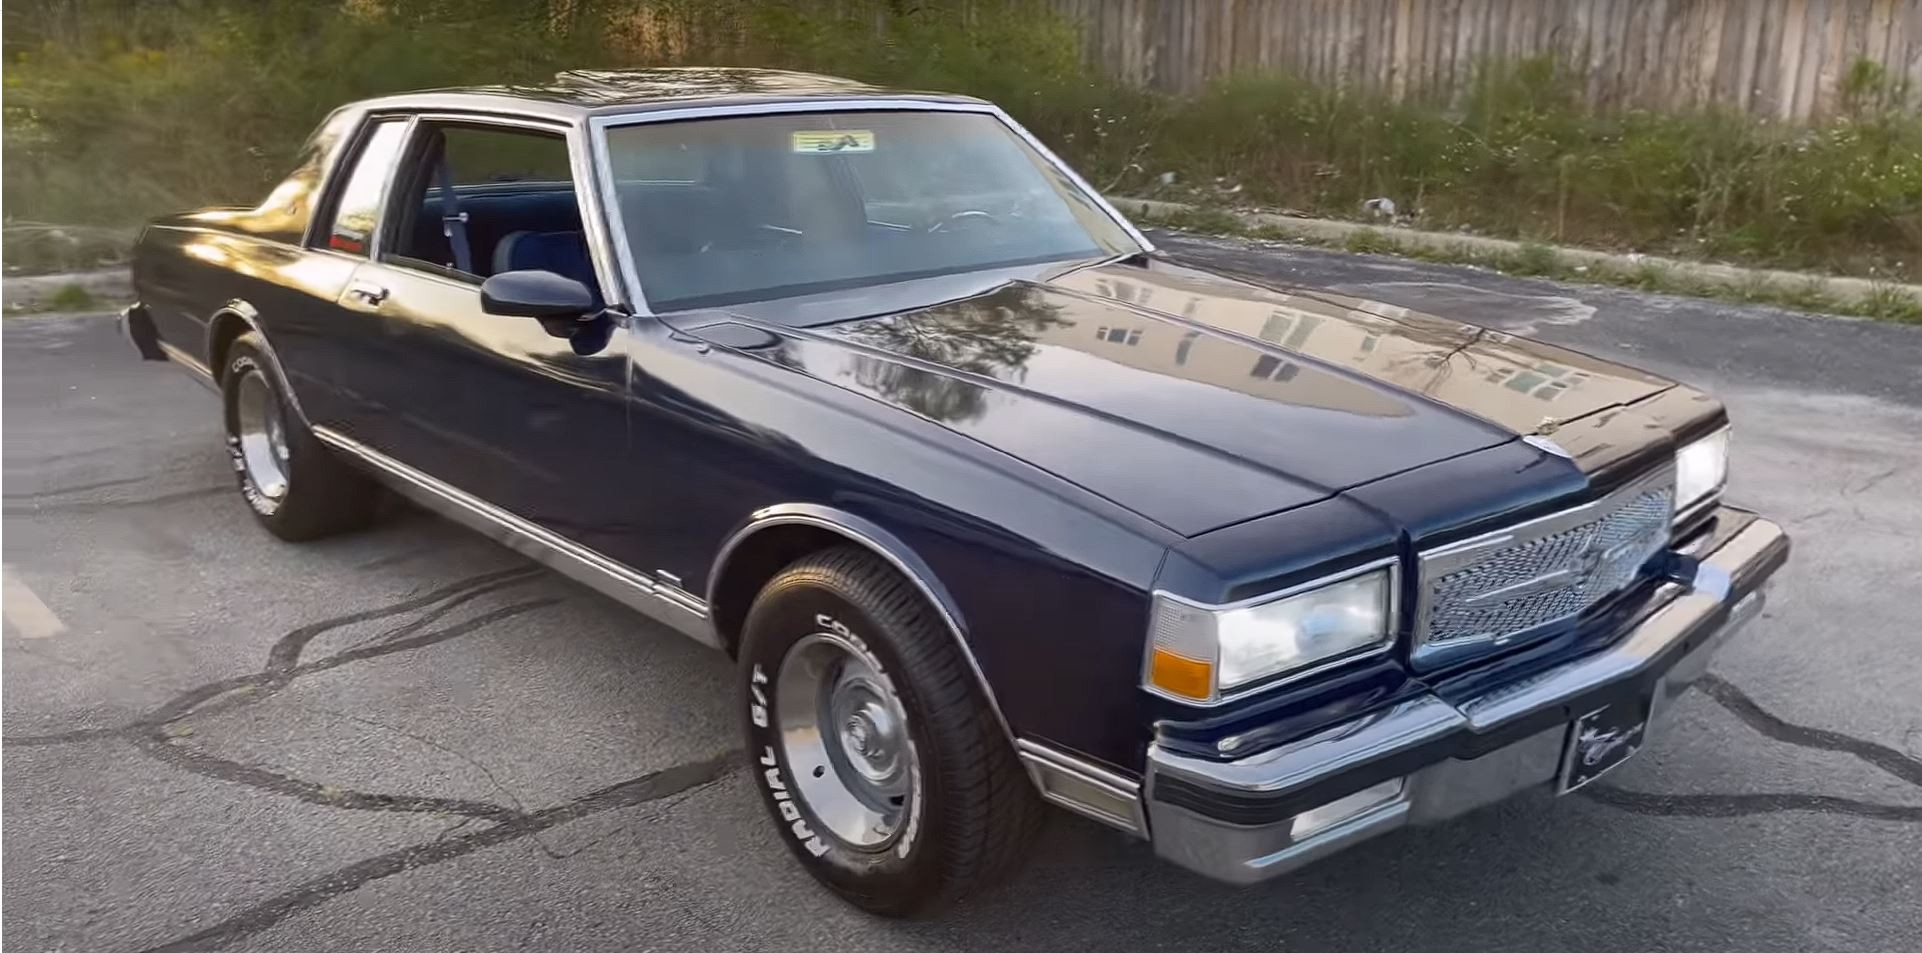 Genius r Turns '86 Box Chevy Into Badass Hot Rod That Could Steal  Your Girlfriend - autoevolution